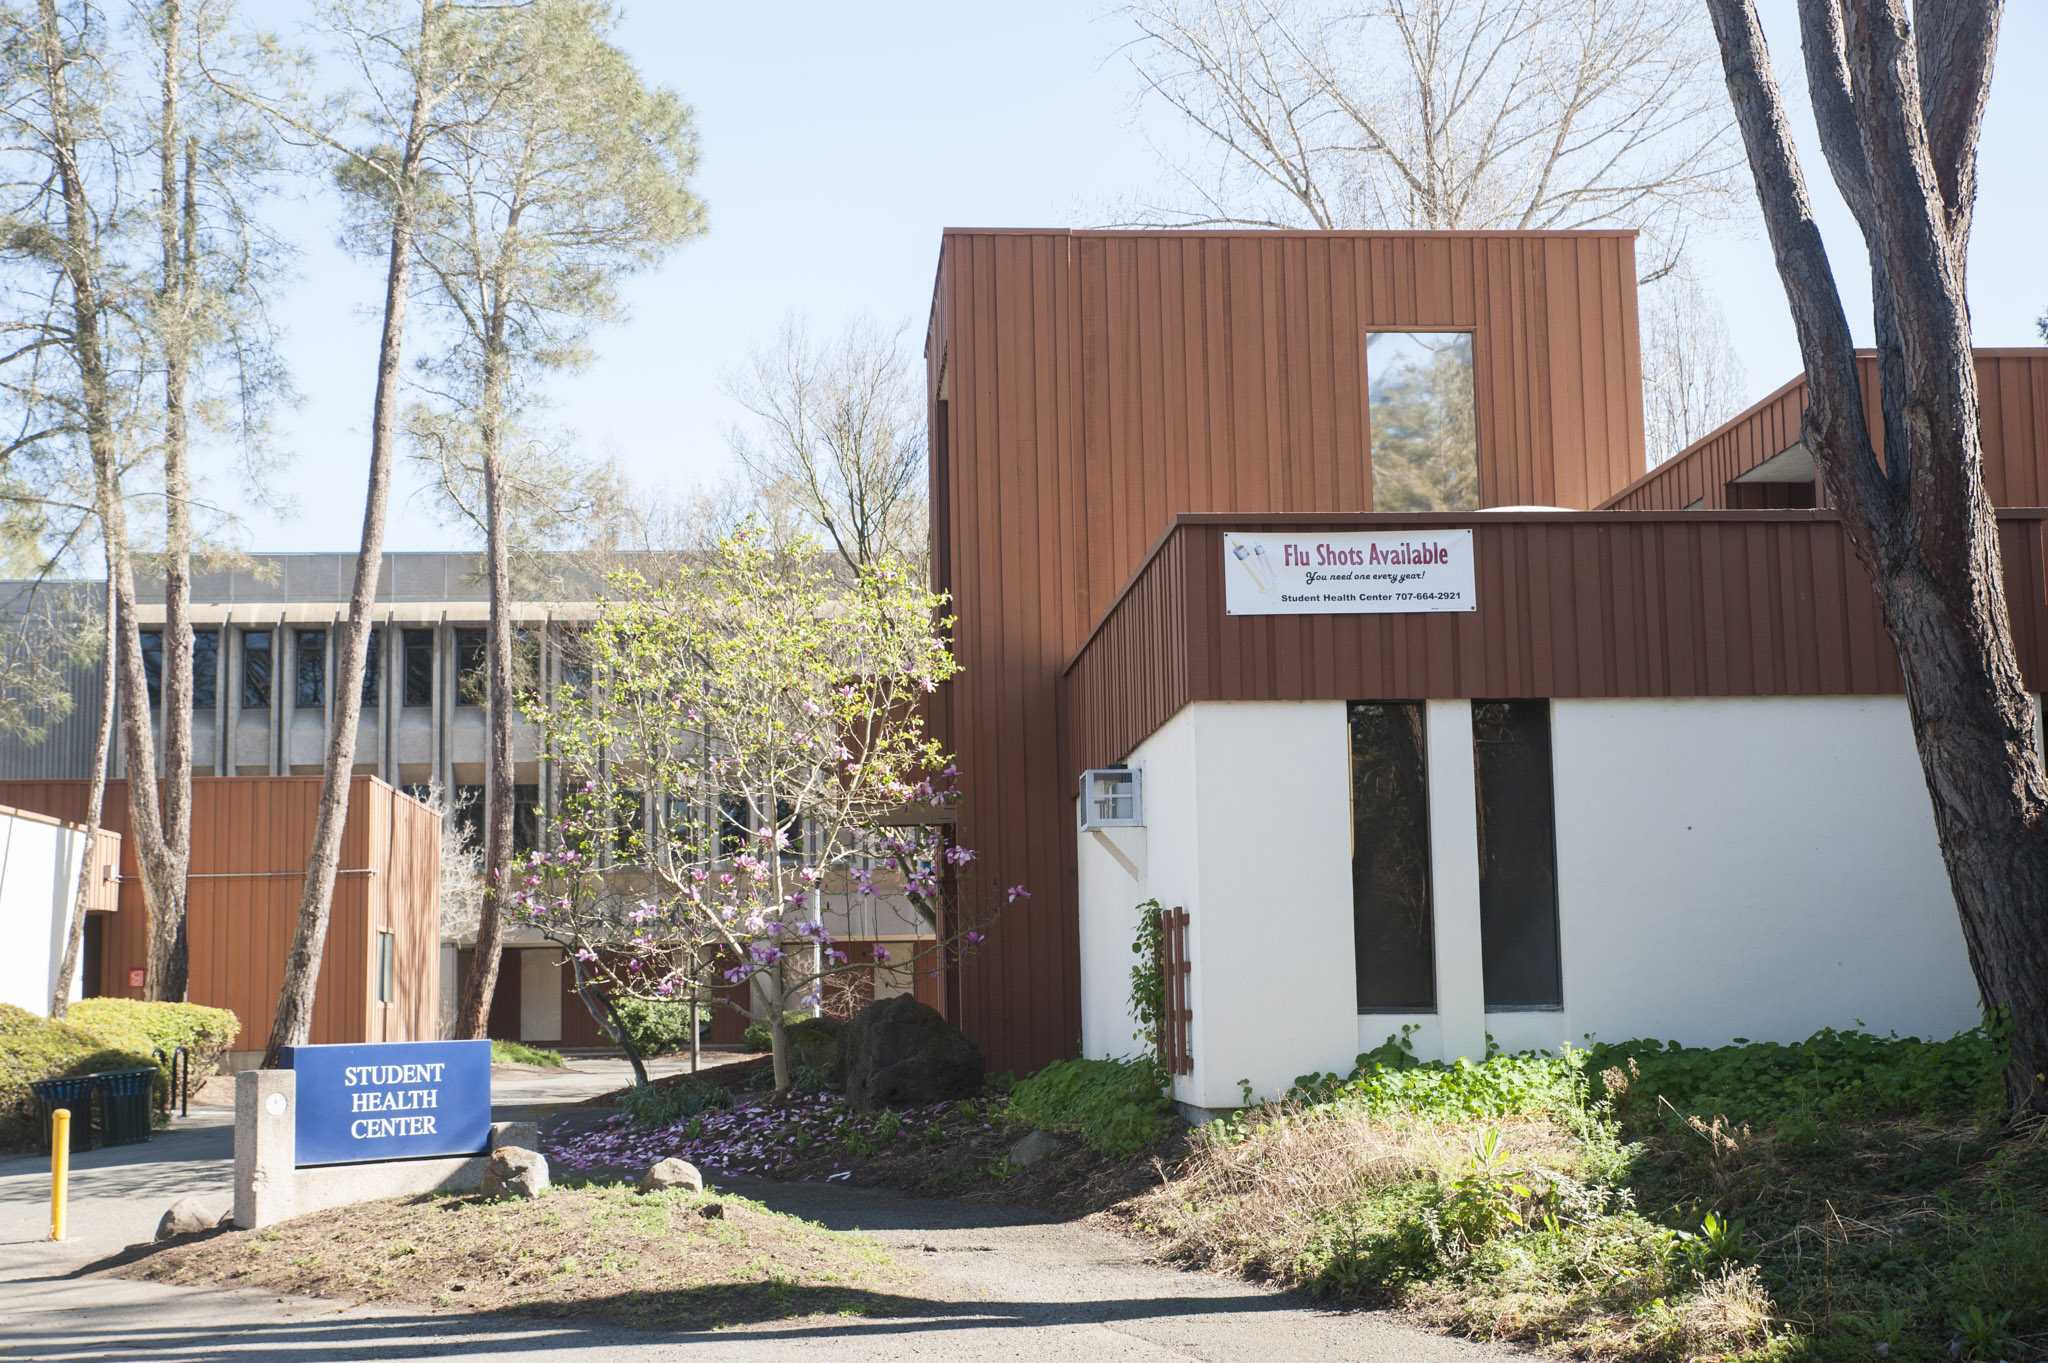 STAR // Connor GibsonThe Sonoma State University Health Center serves as a resource for students with questions regarding the recent outbreak of measles